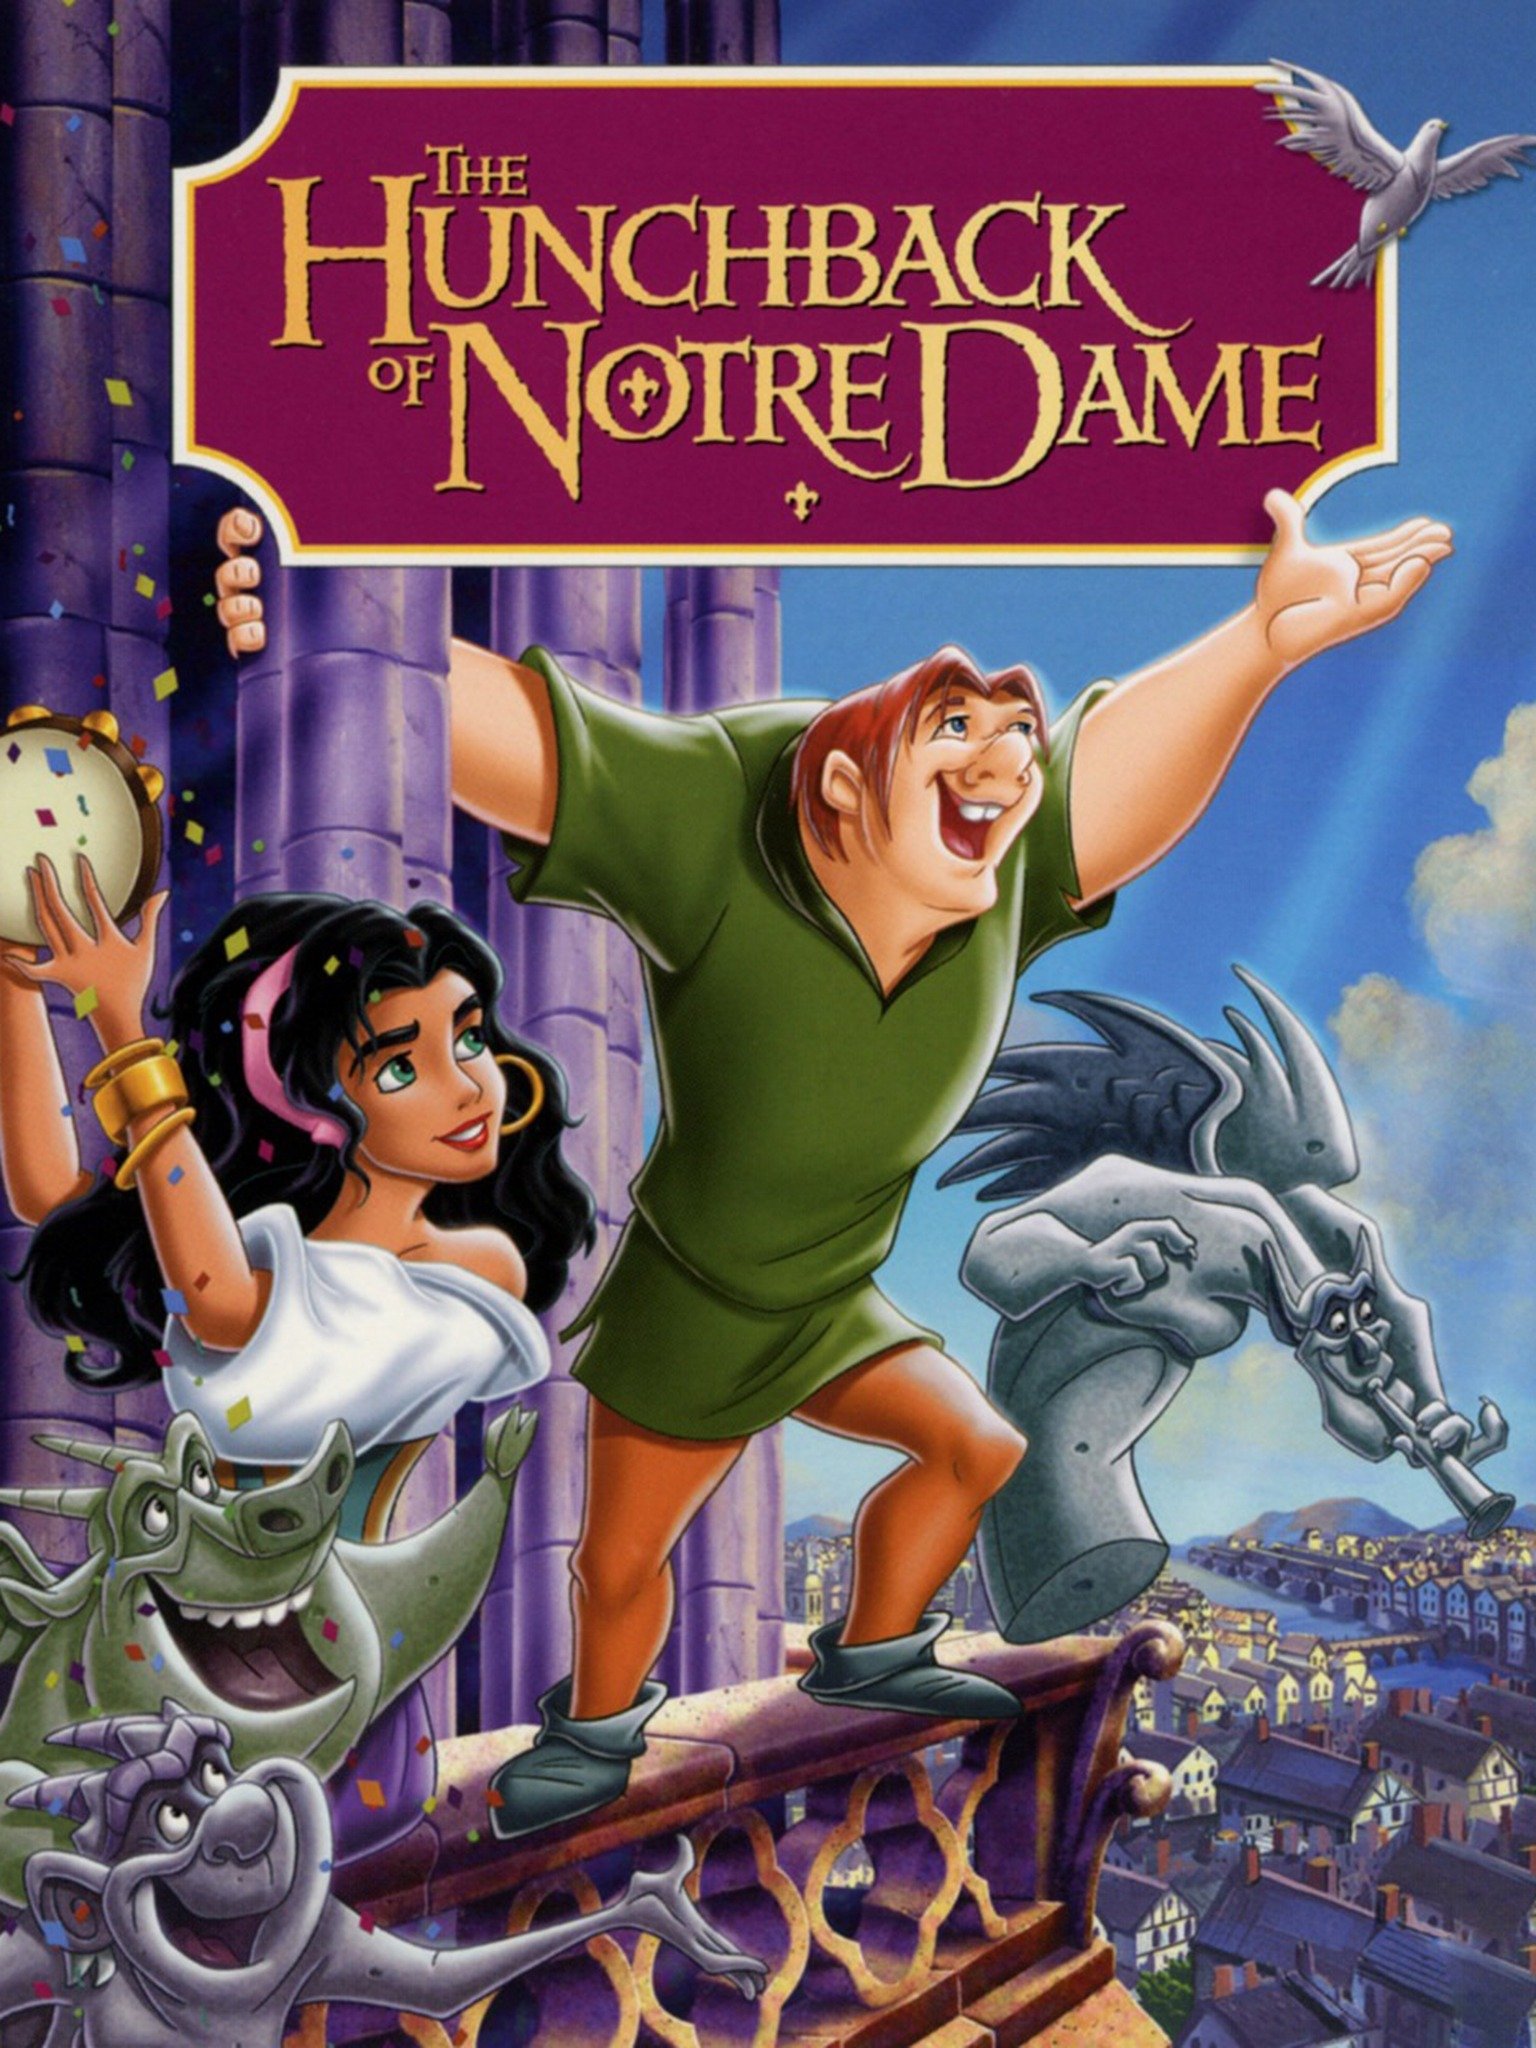 The Hunchback of Notre Dame (1996) - Rotten Tomatoes